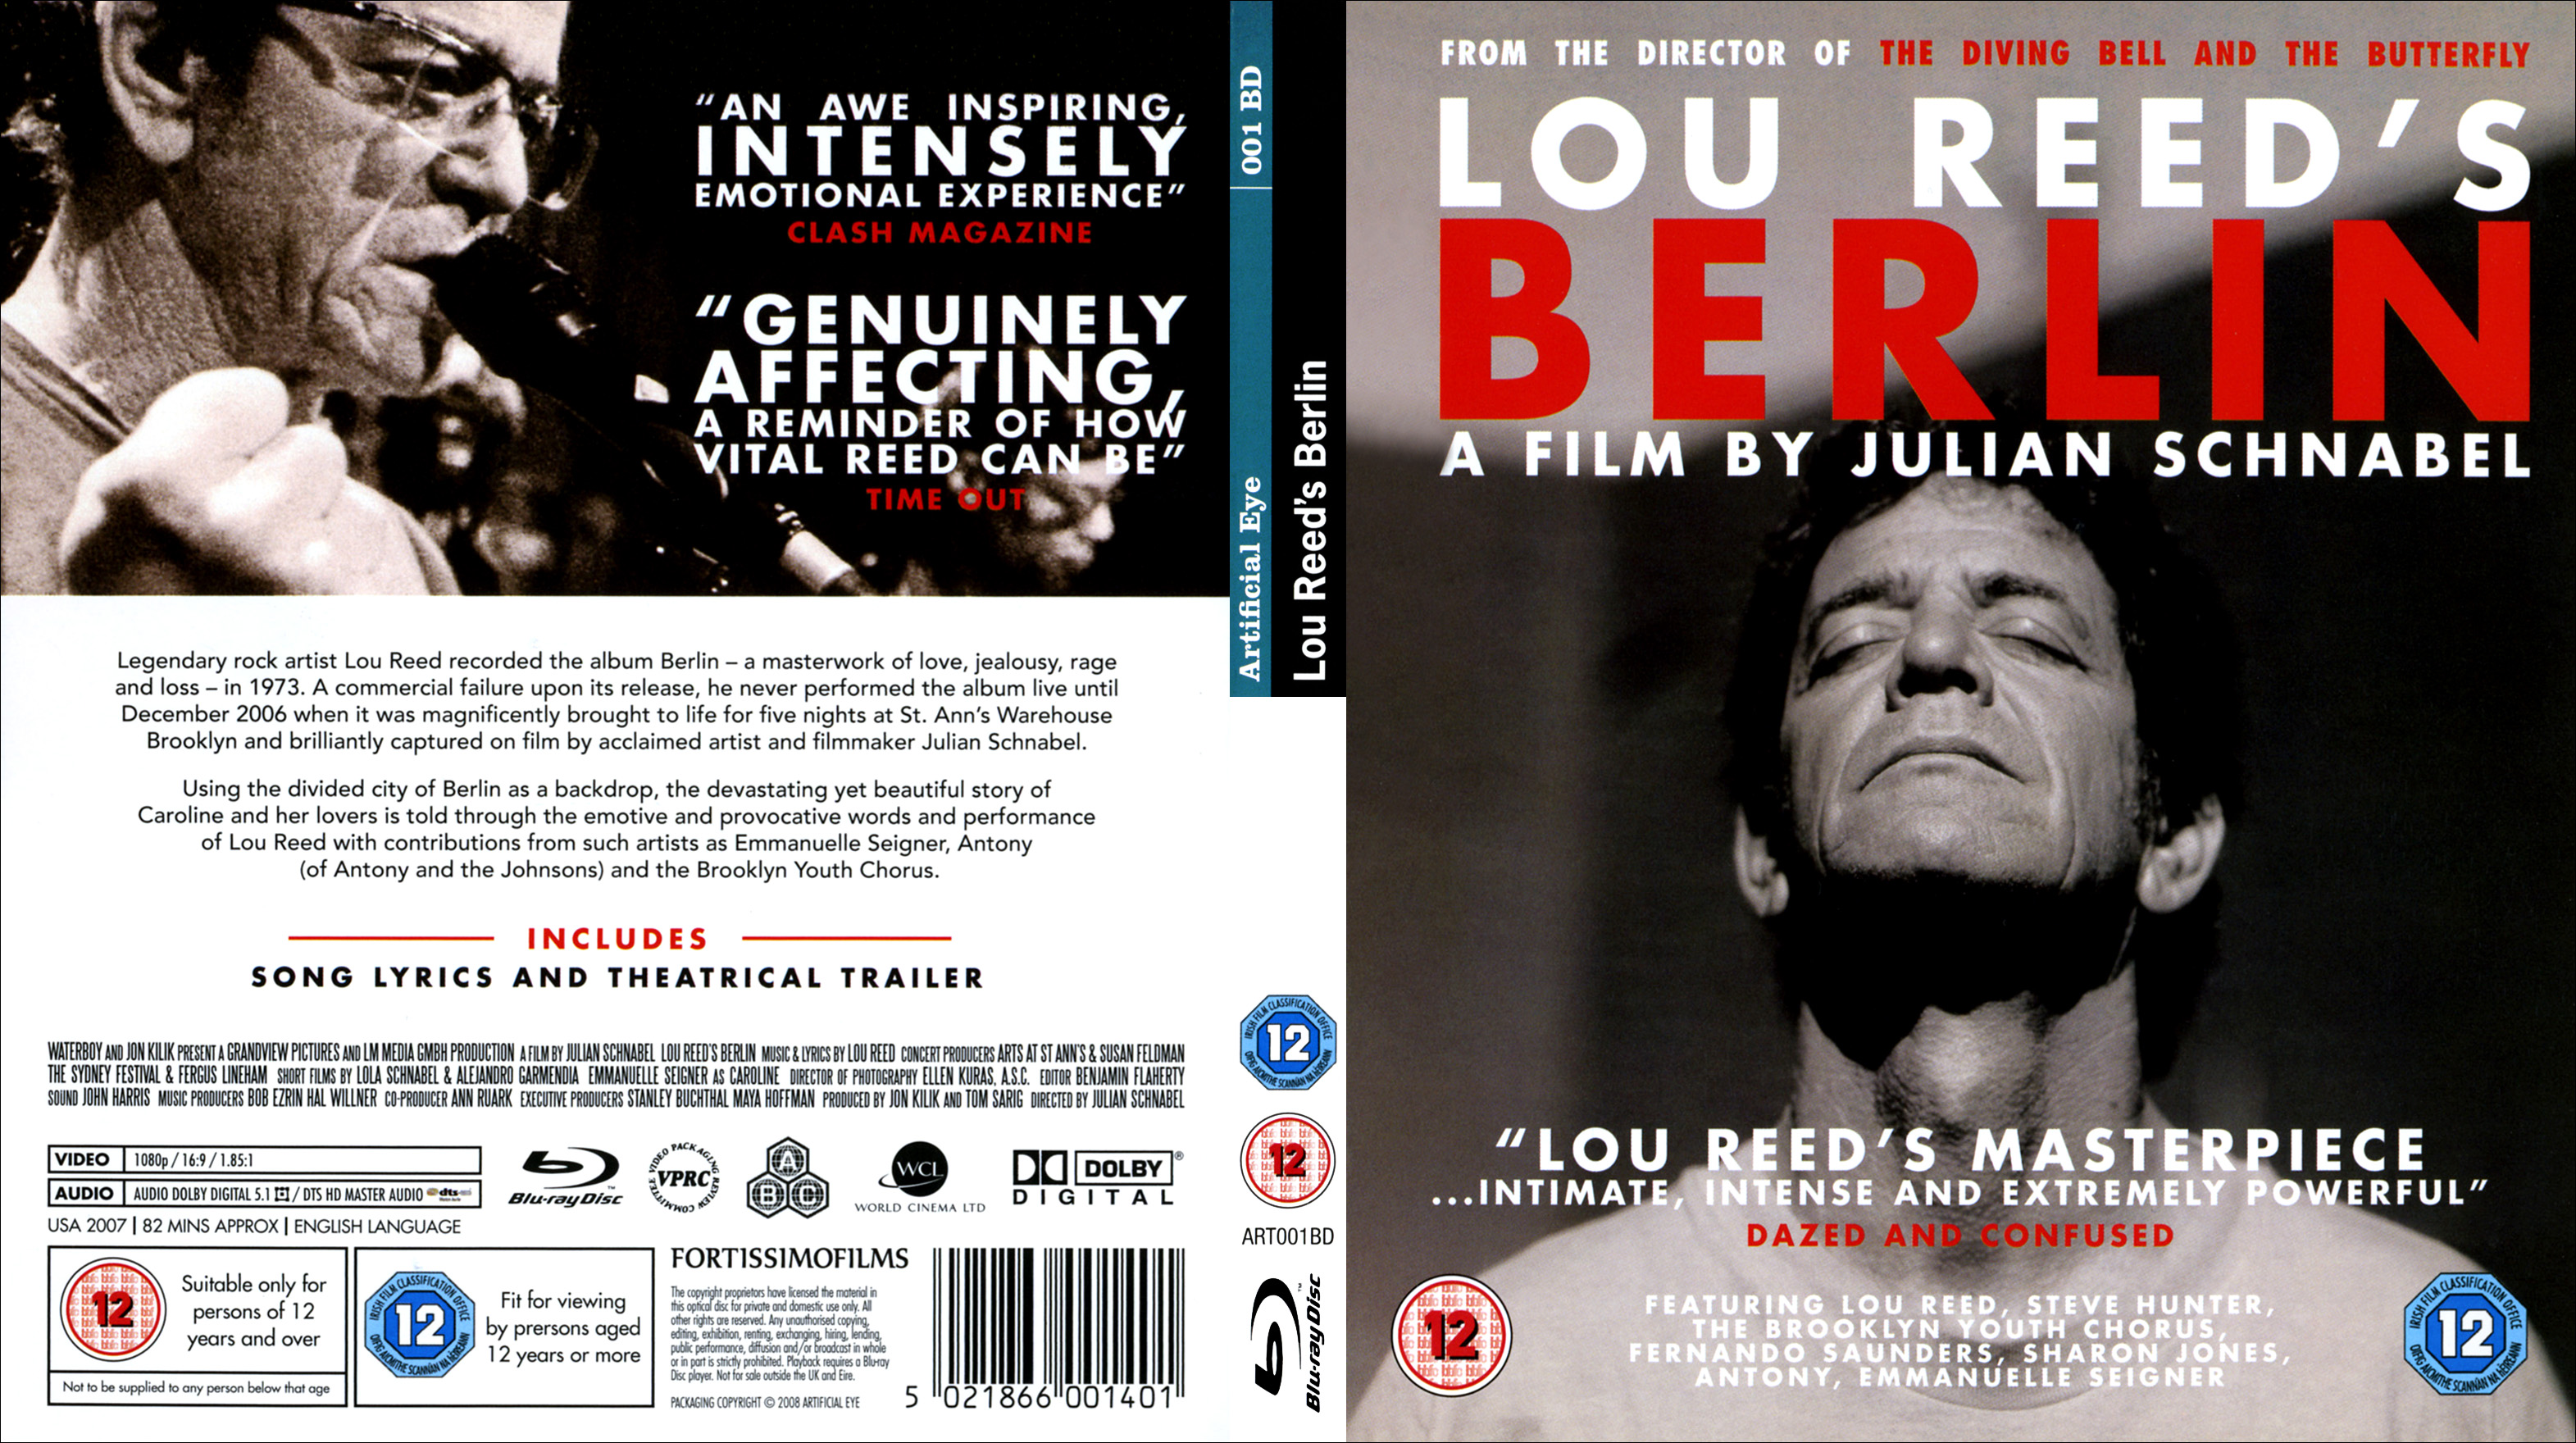 Jaquette DVD Lou Reed